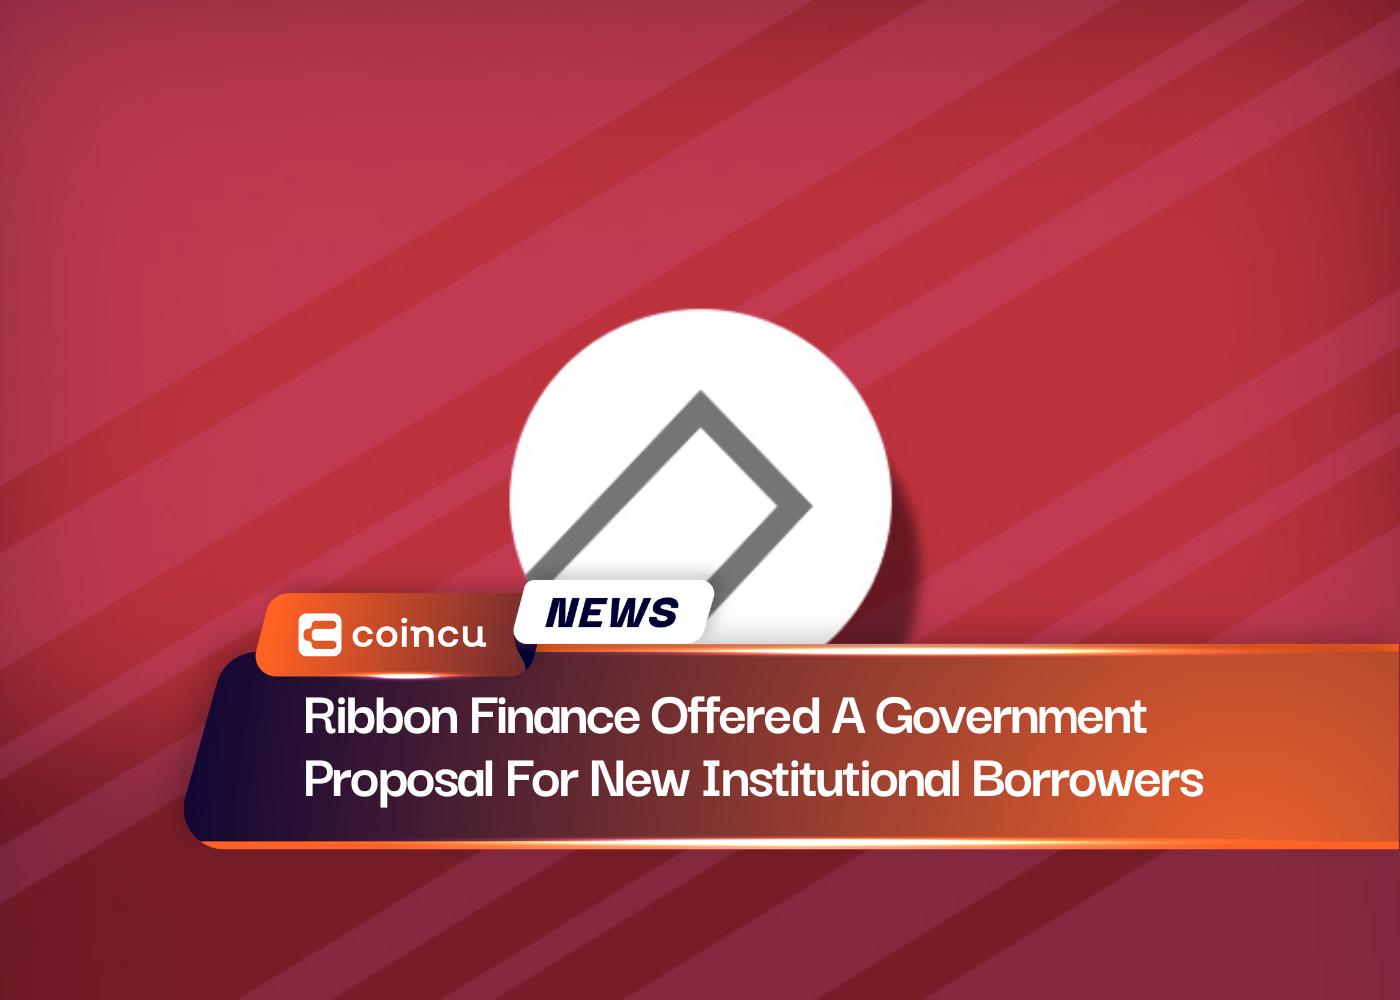 Ribbon Finance Offered A Government Proposal For New Institutional Borrowers